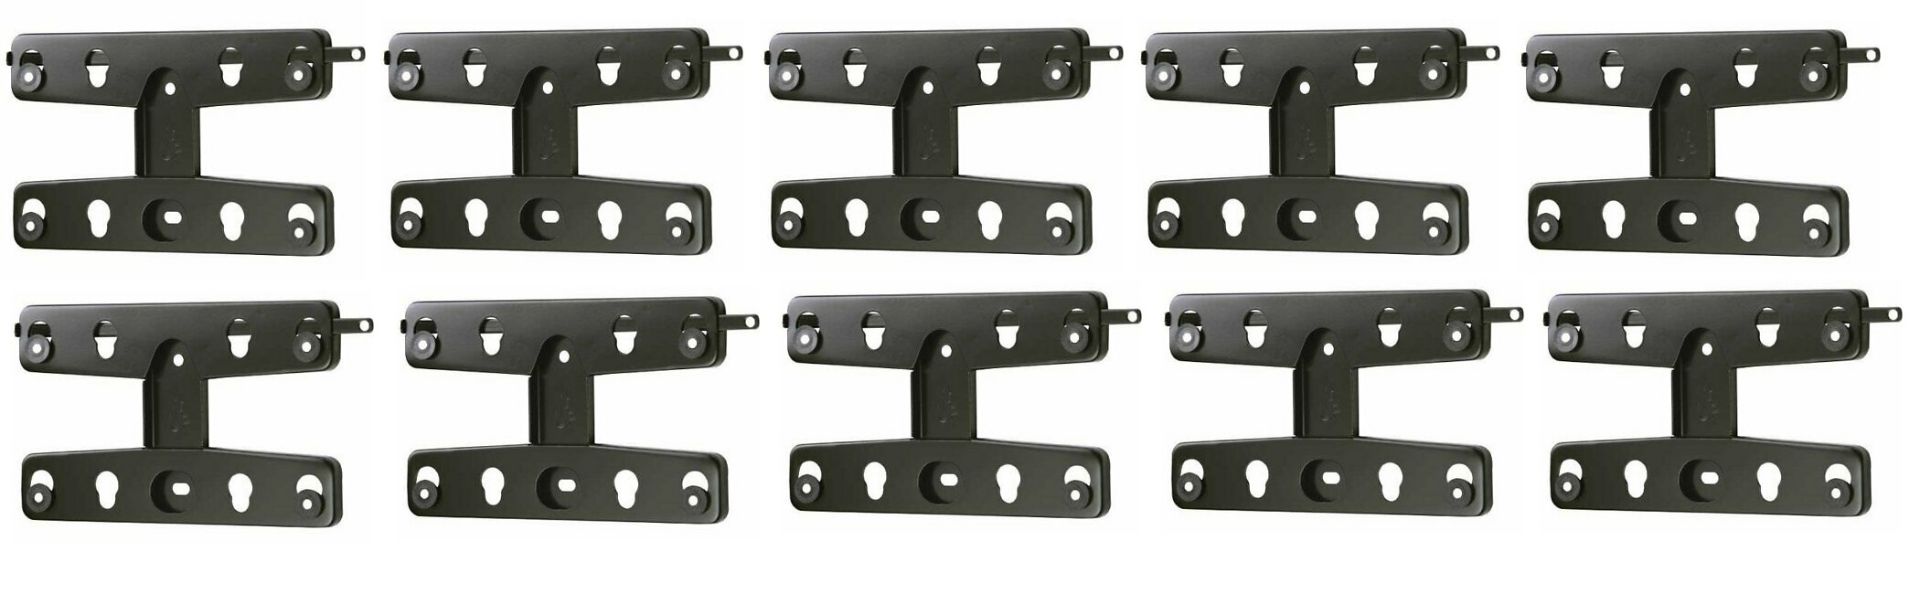 + VAT Brand New Secura Low Profile Ultra Slim TV Wall Mounts For Models 13"-26" - Online Price £